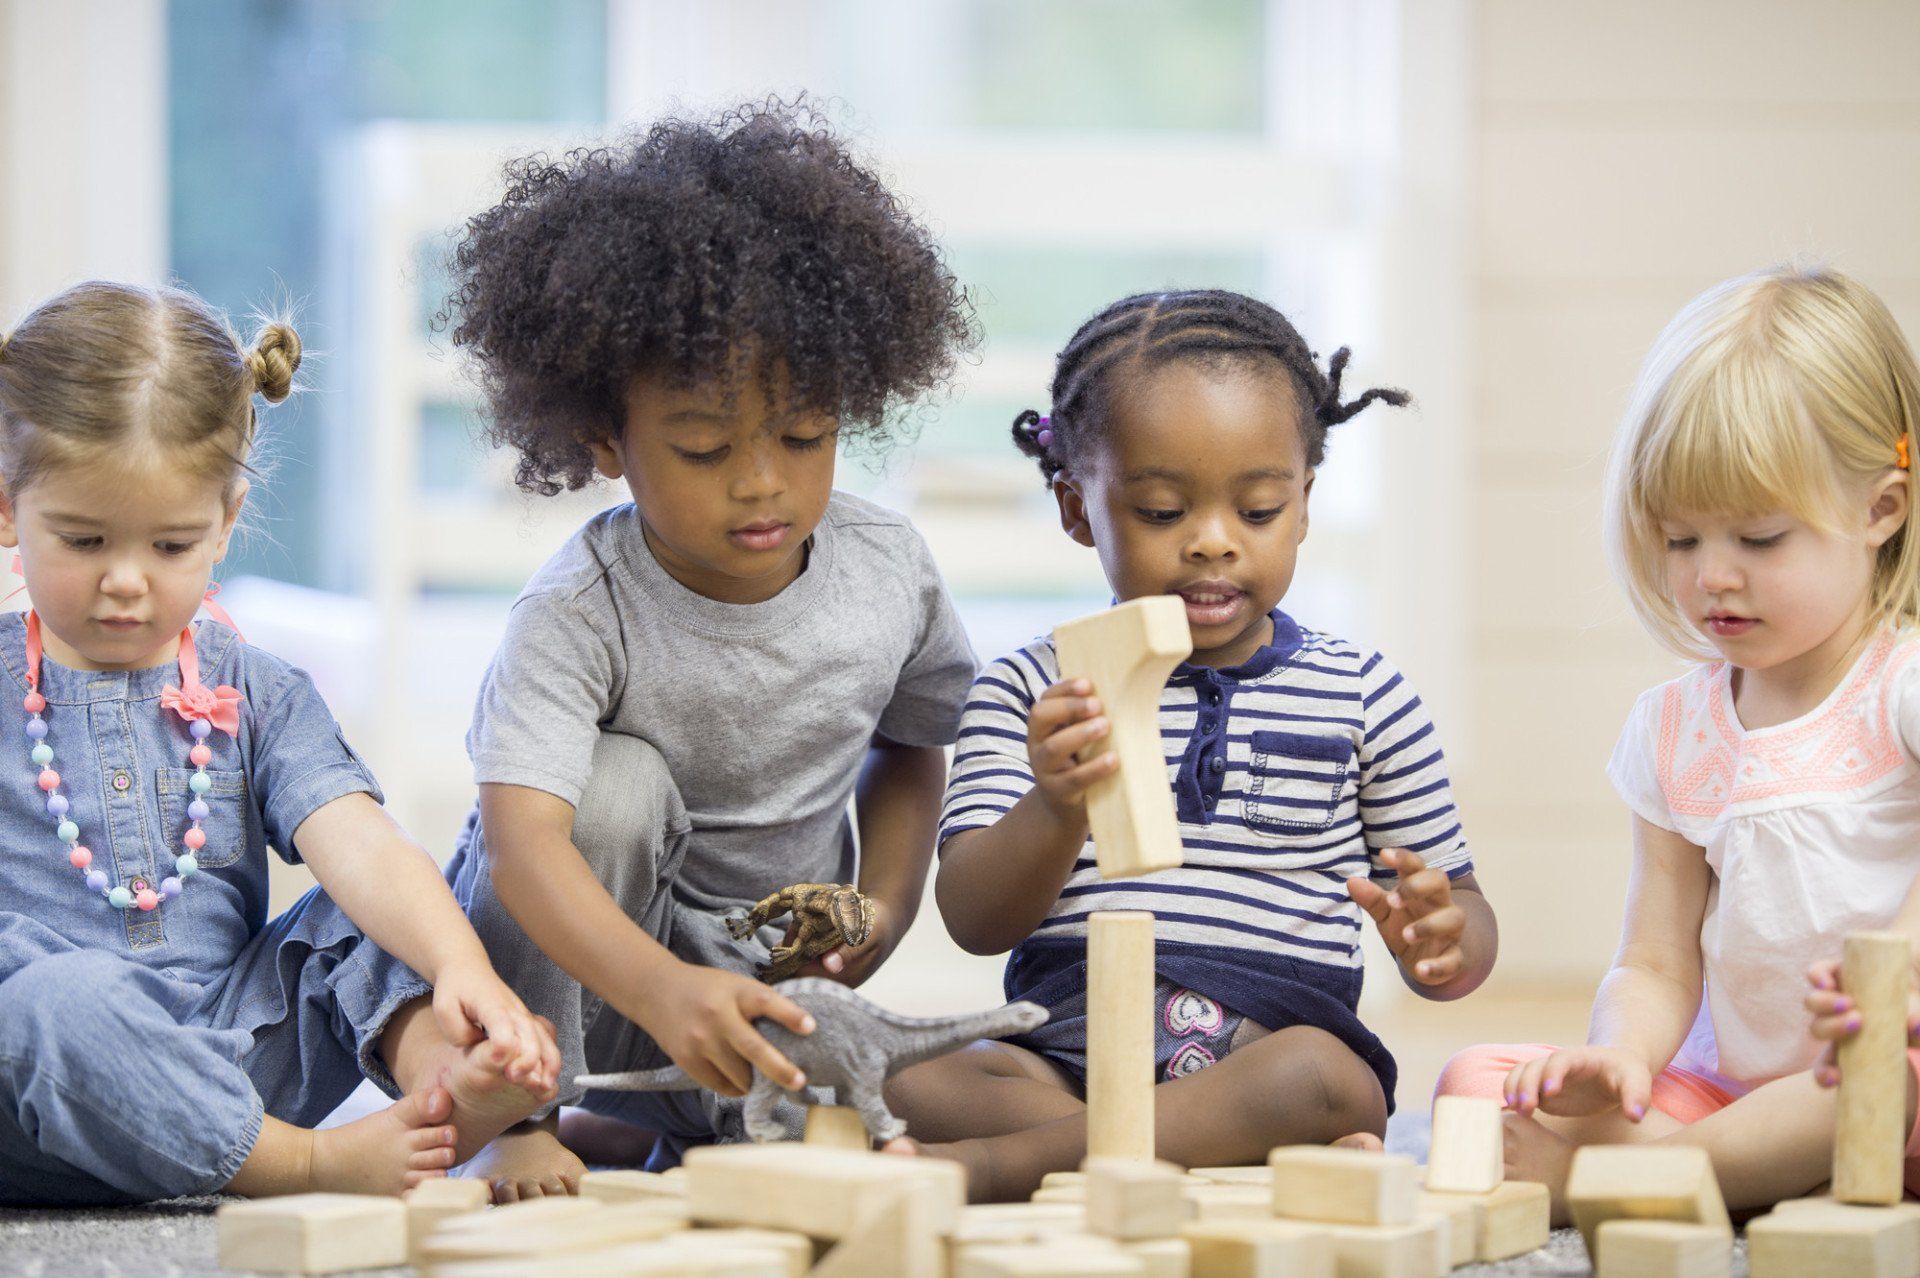  Preschool children are playing and learning in a classroom, building a tower with wooden blocks.